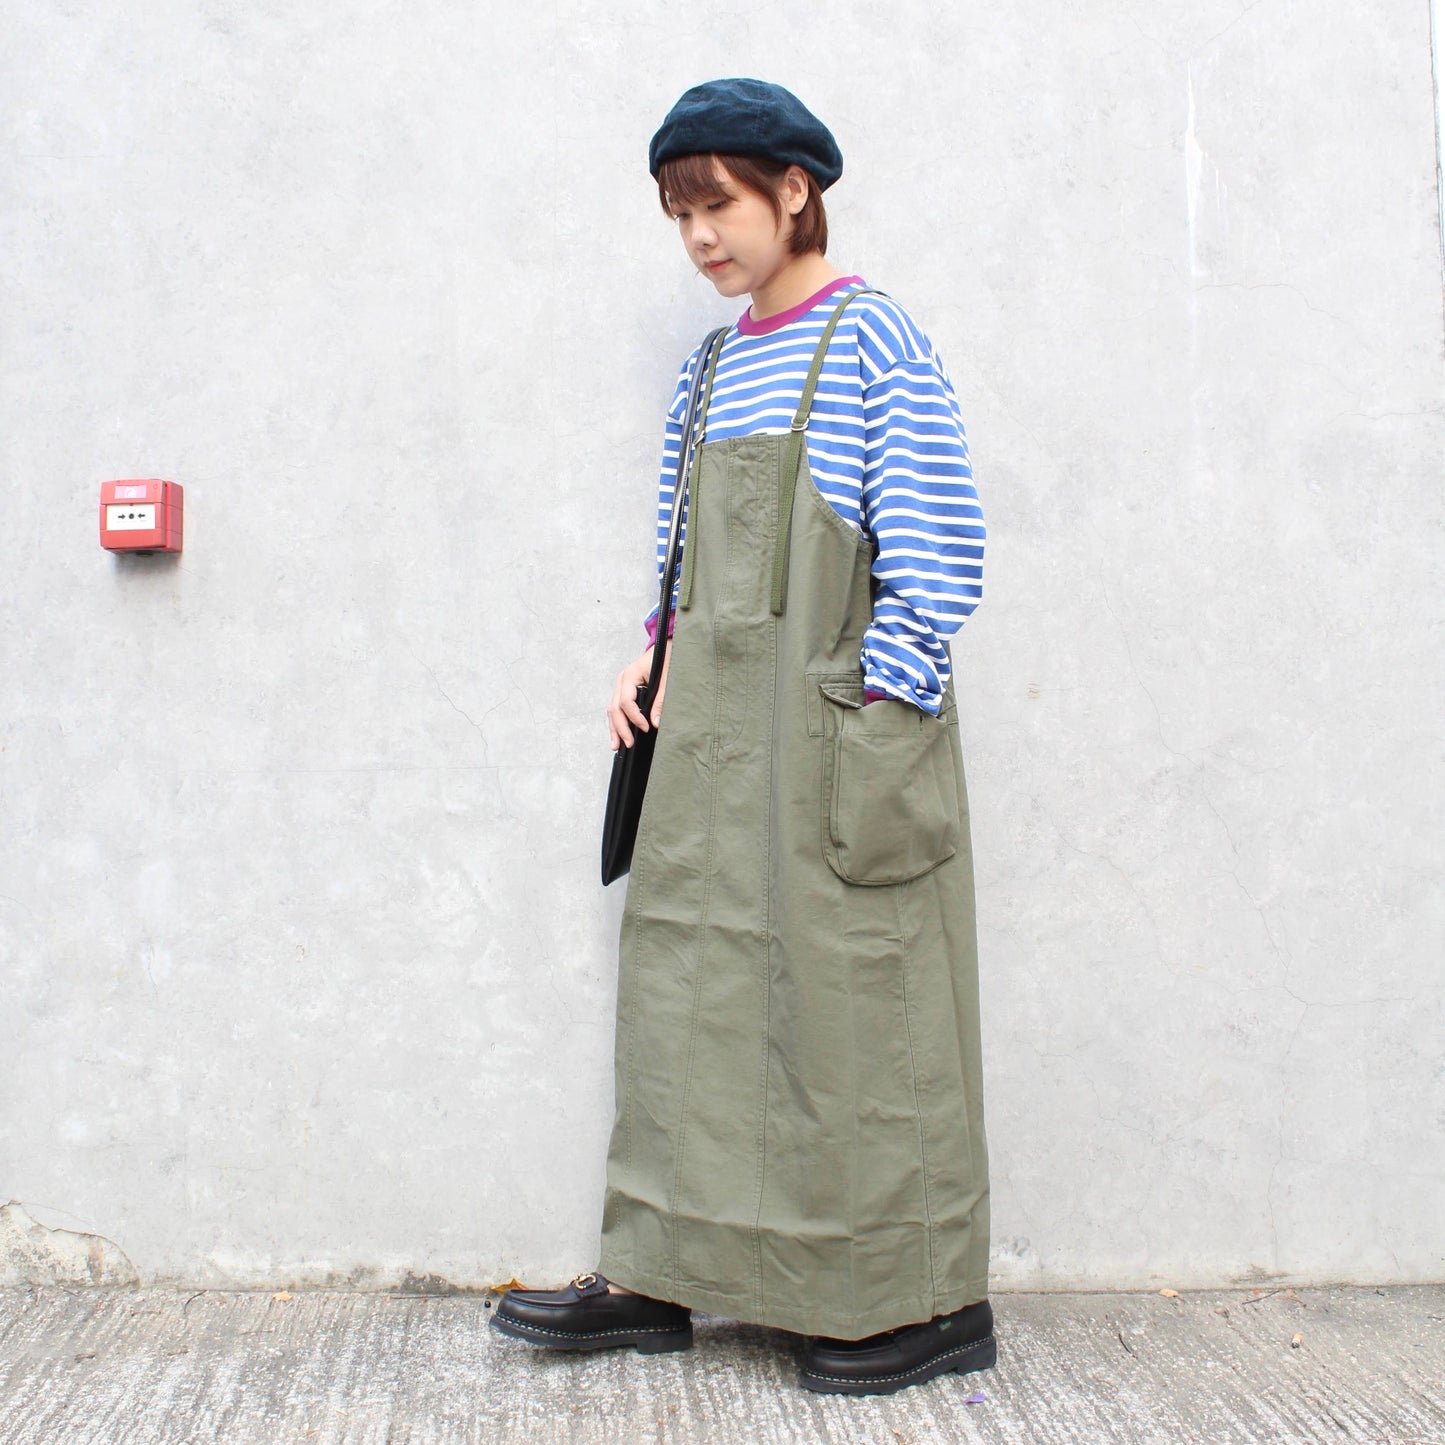 D.M.G -
Military Overall Skirts